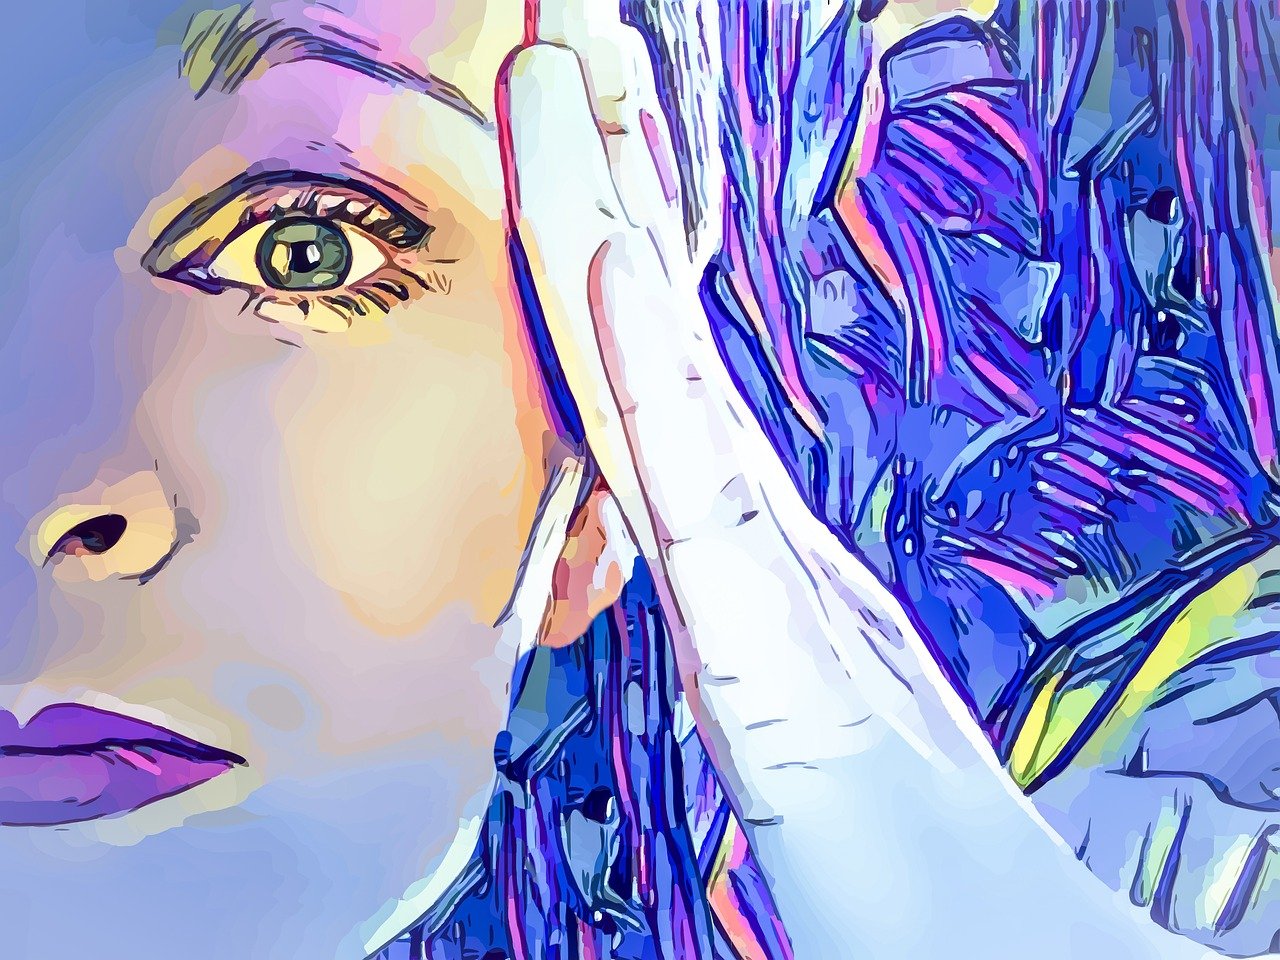 Cartoon image of a woman who looks worried, with her hand raised to her temple as if she is stressed. Purple hues.